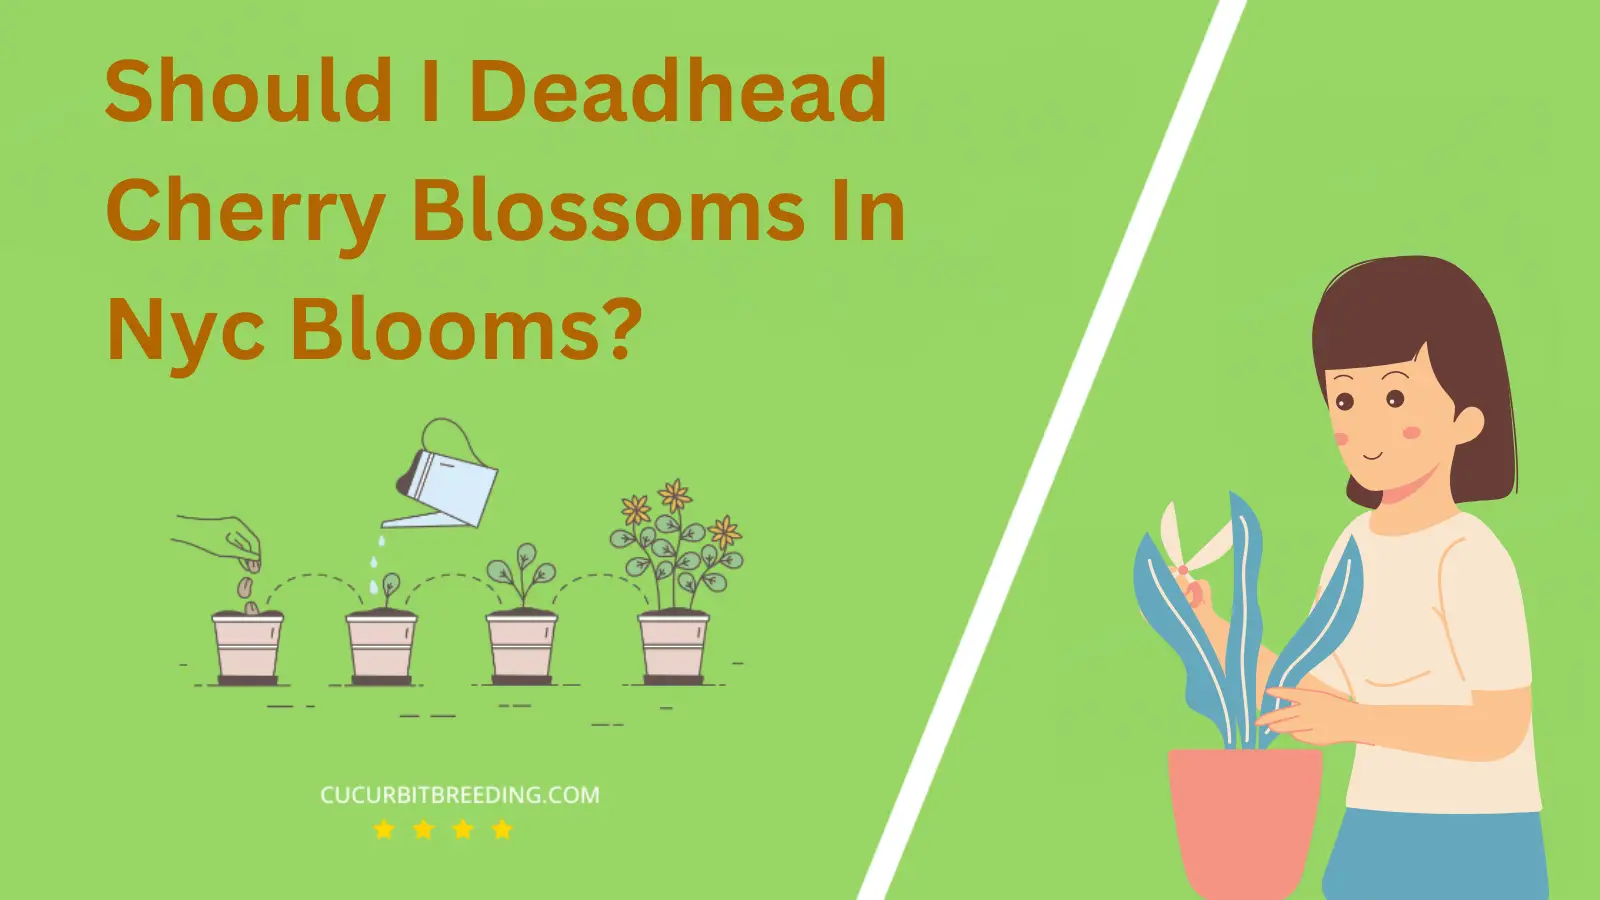 Should I Deadhead Cherry Blossoms In Nyc Blooms?